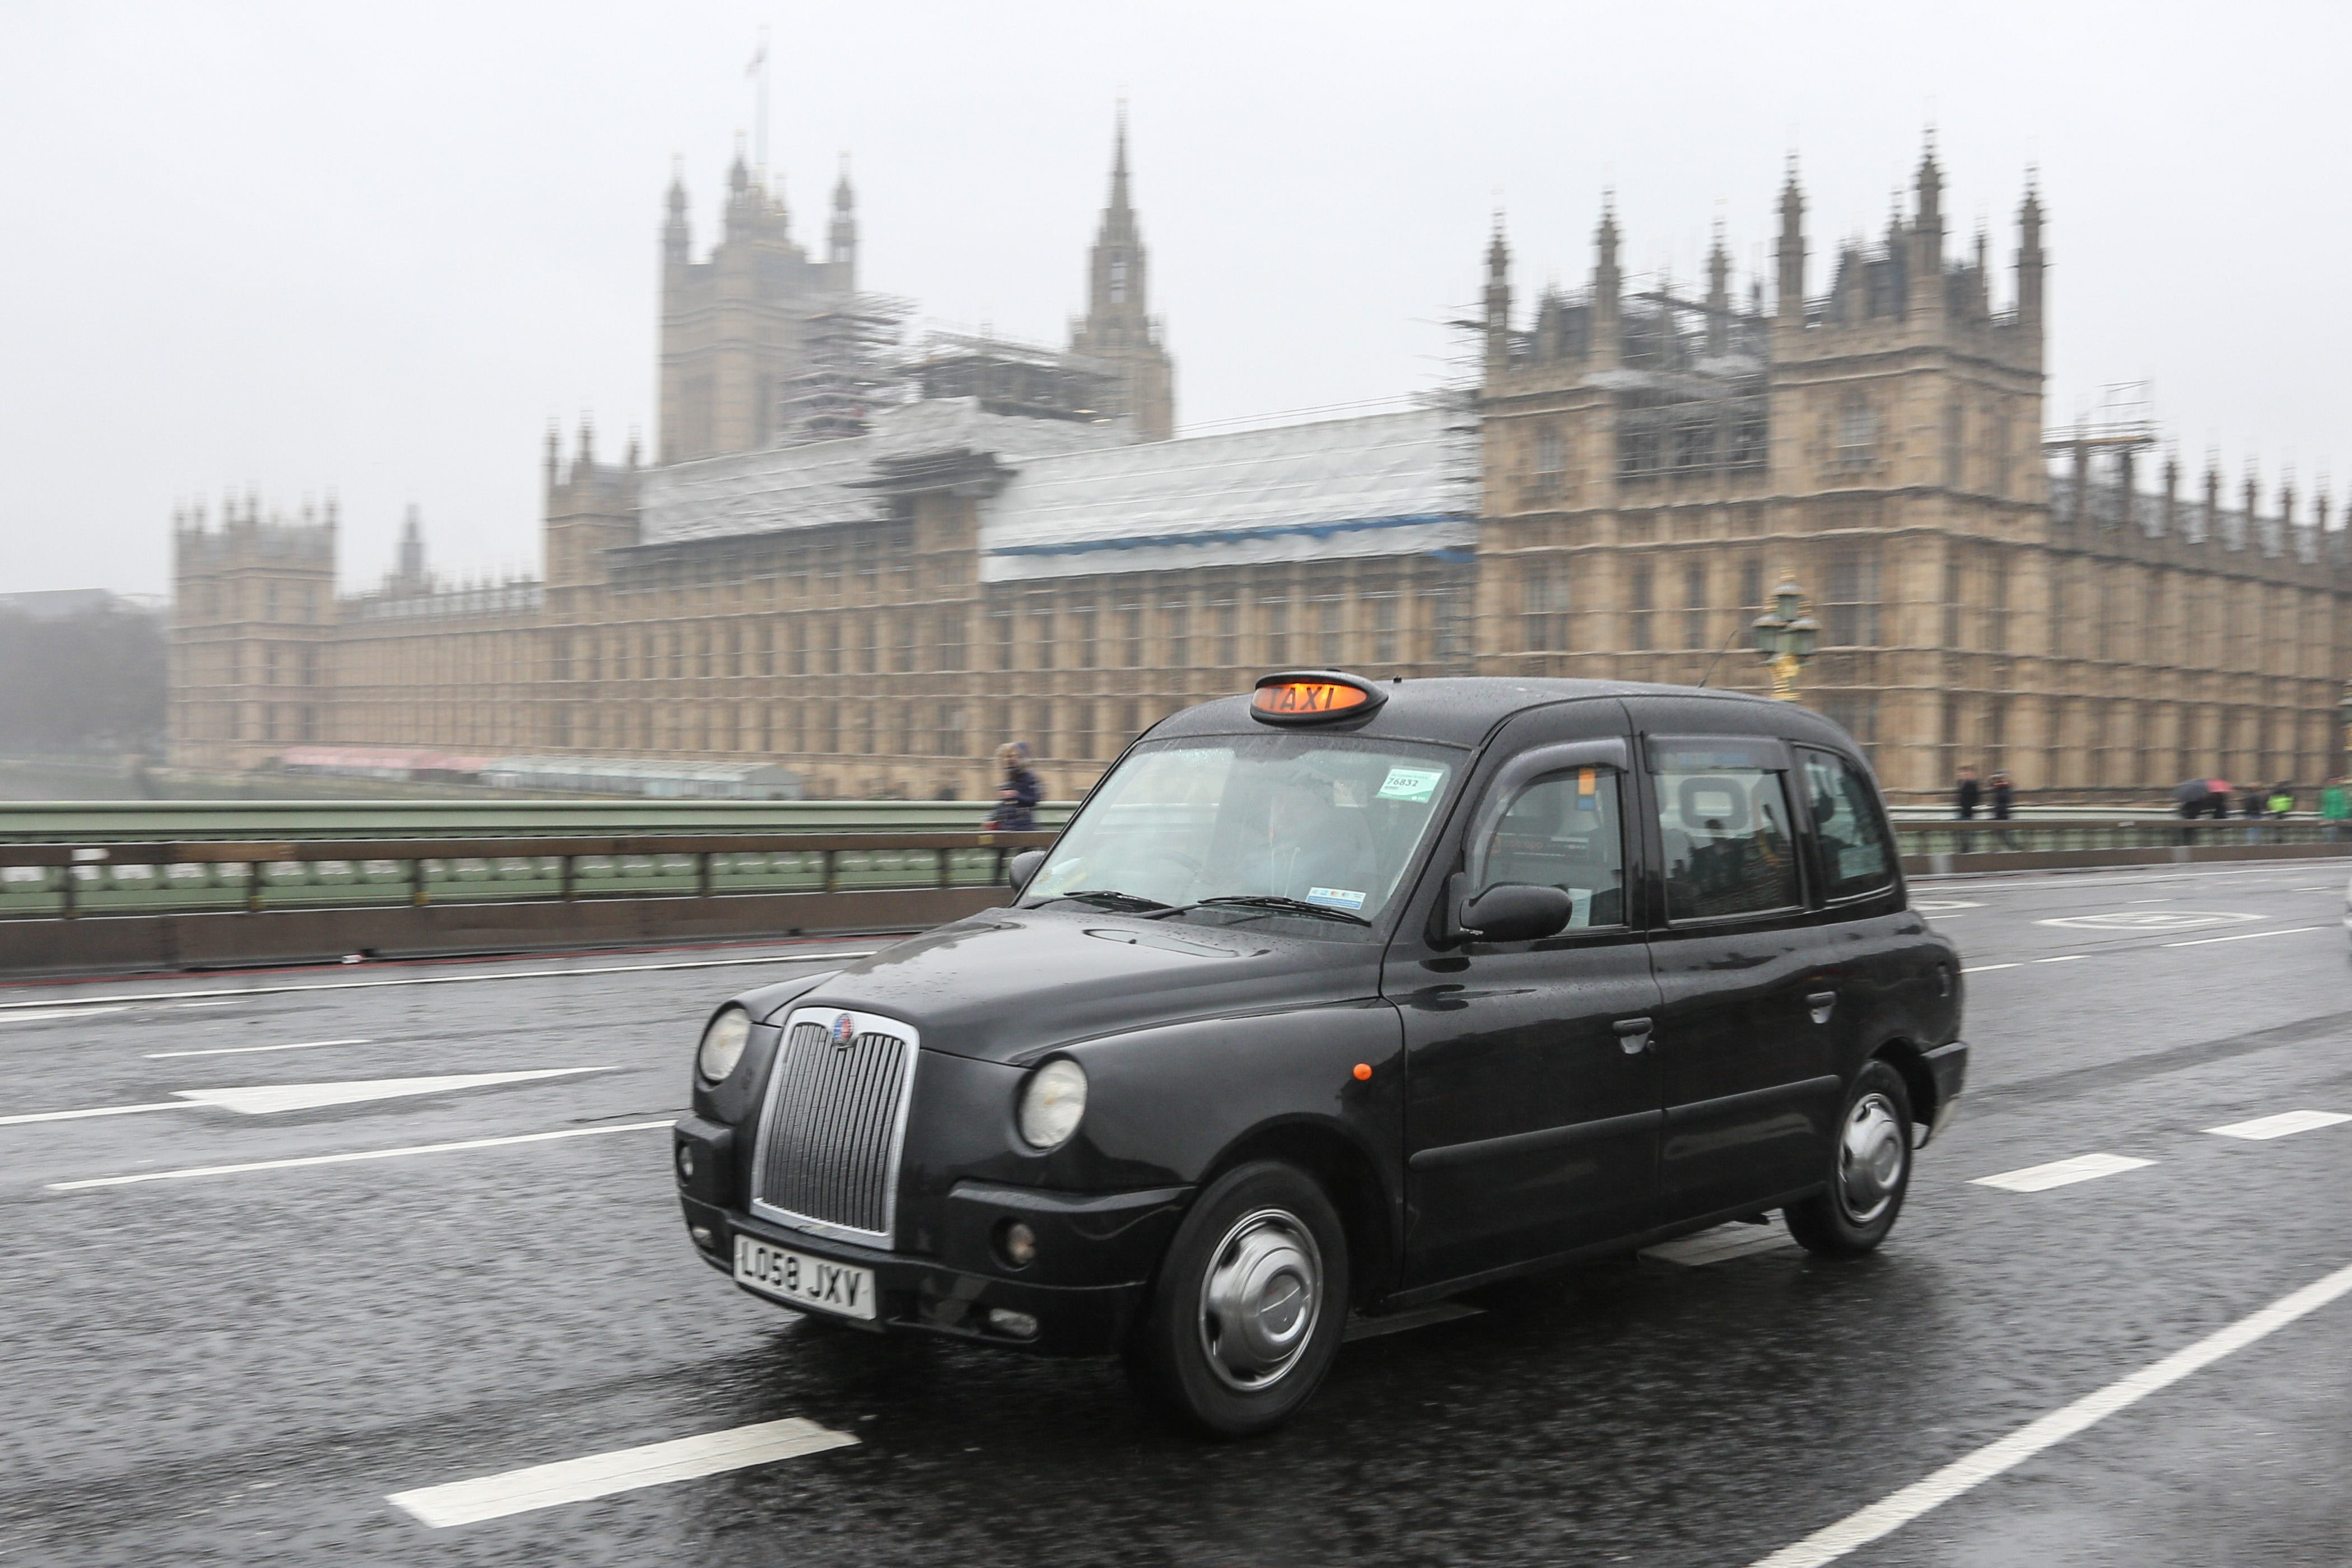 microsoft, uber is being sued for over $300 million by thousands of london's iconic black cab drivers